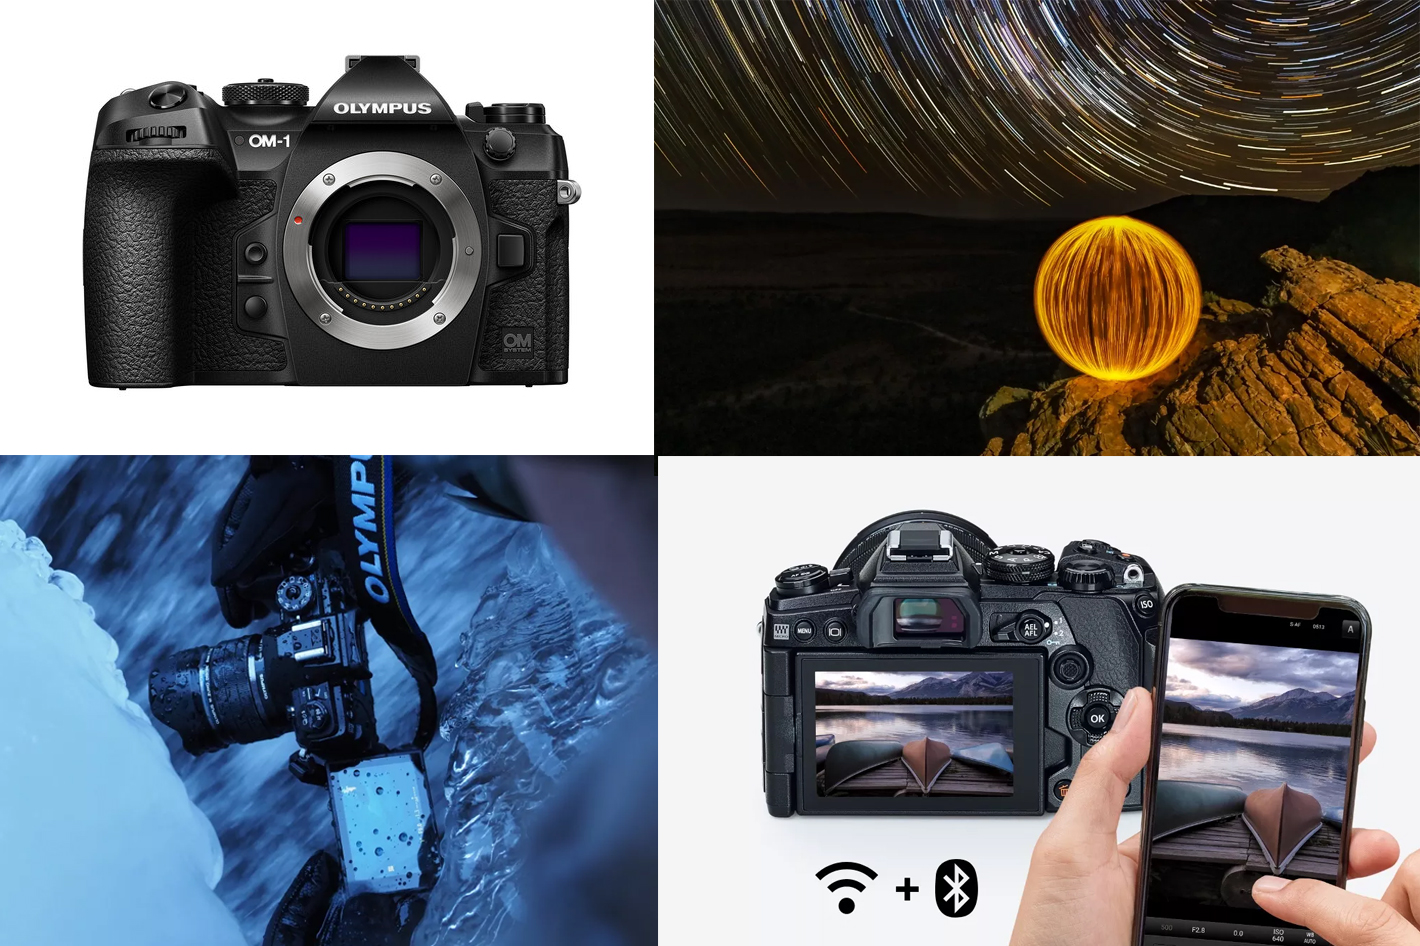 OM-1: the new Quad Pixel AF camera with enhanced video functions